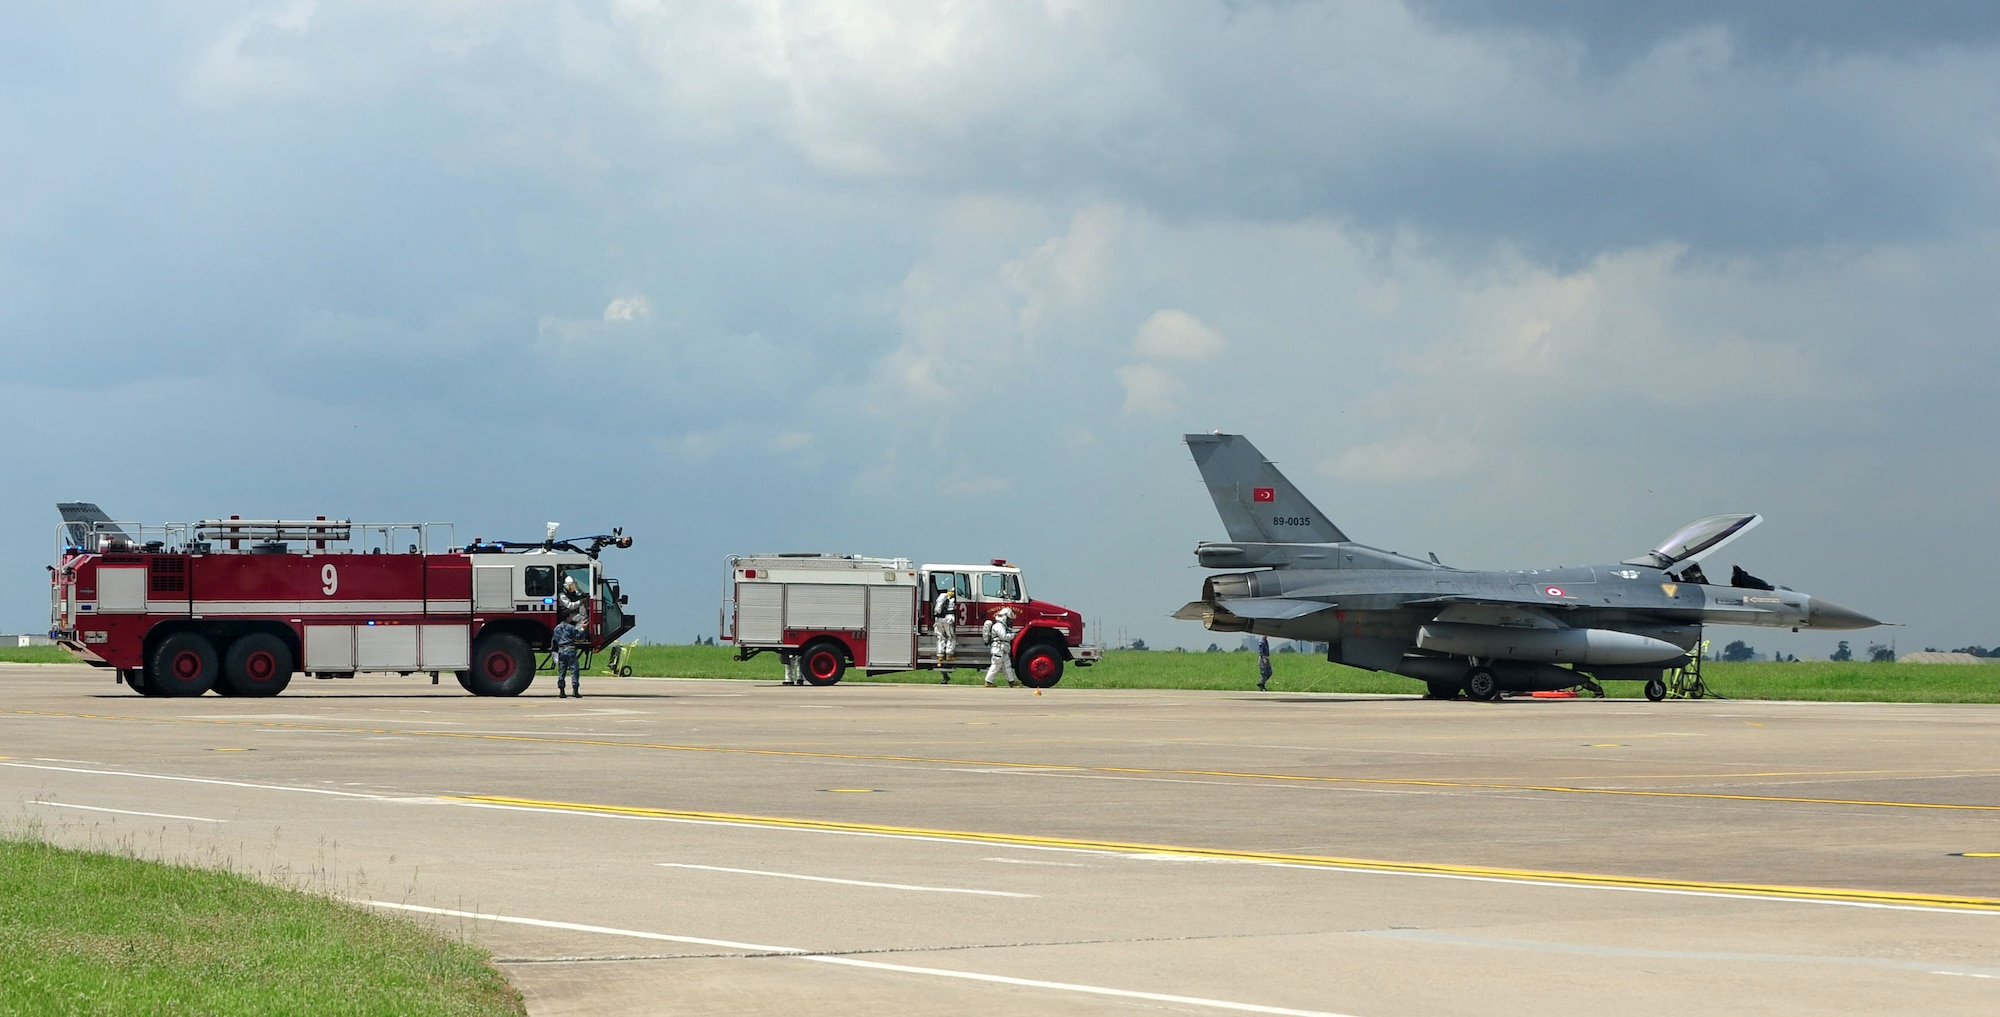 Members of the Turkish air force conduct an aircraft exercise April 11, 2013, at Incirlik Air Base, Turkey. The 39th Air Base Wing Safety office assisted during the scenario that simulated a broken landing gear on an F-16 aircraft. (U.S. Air Force photo by Senior Airman Anthony Sanchelli/Released)